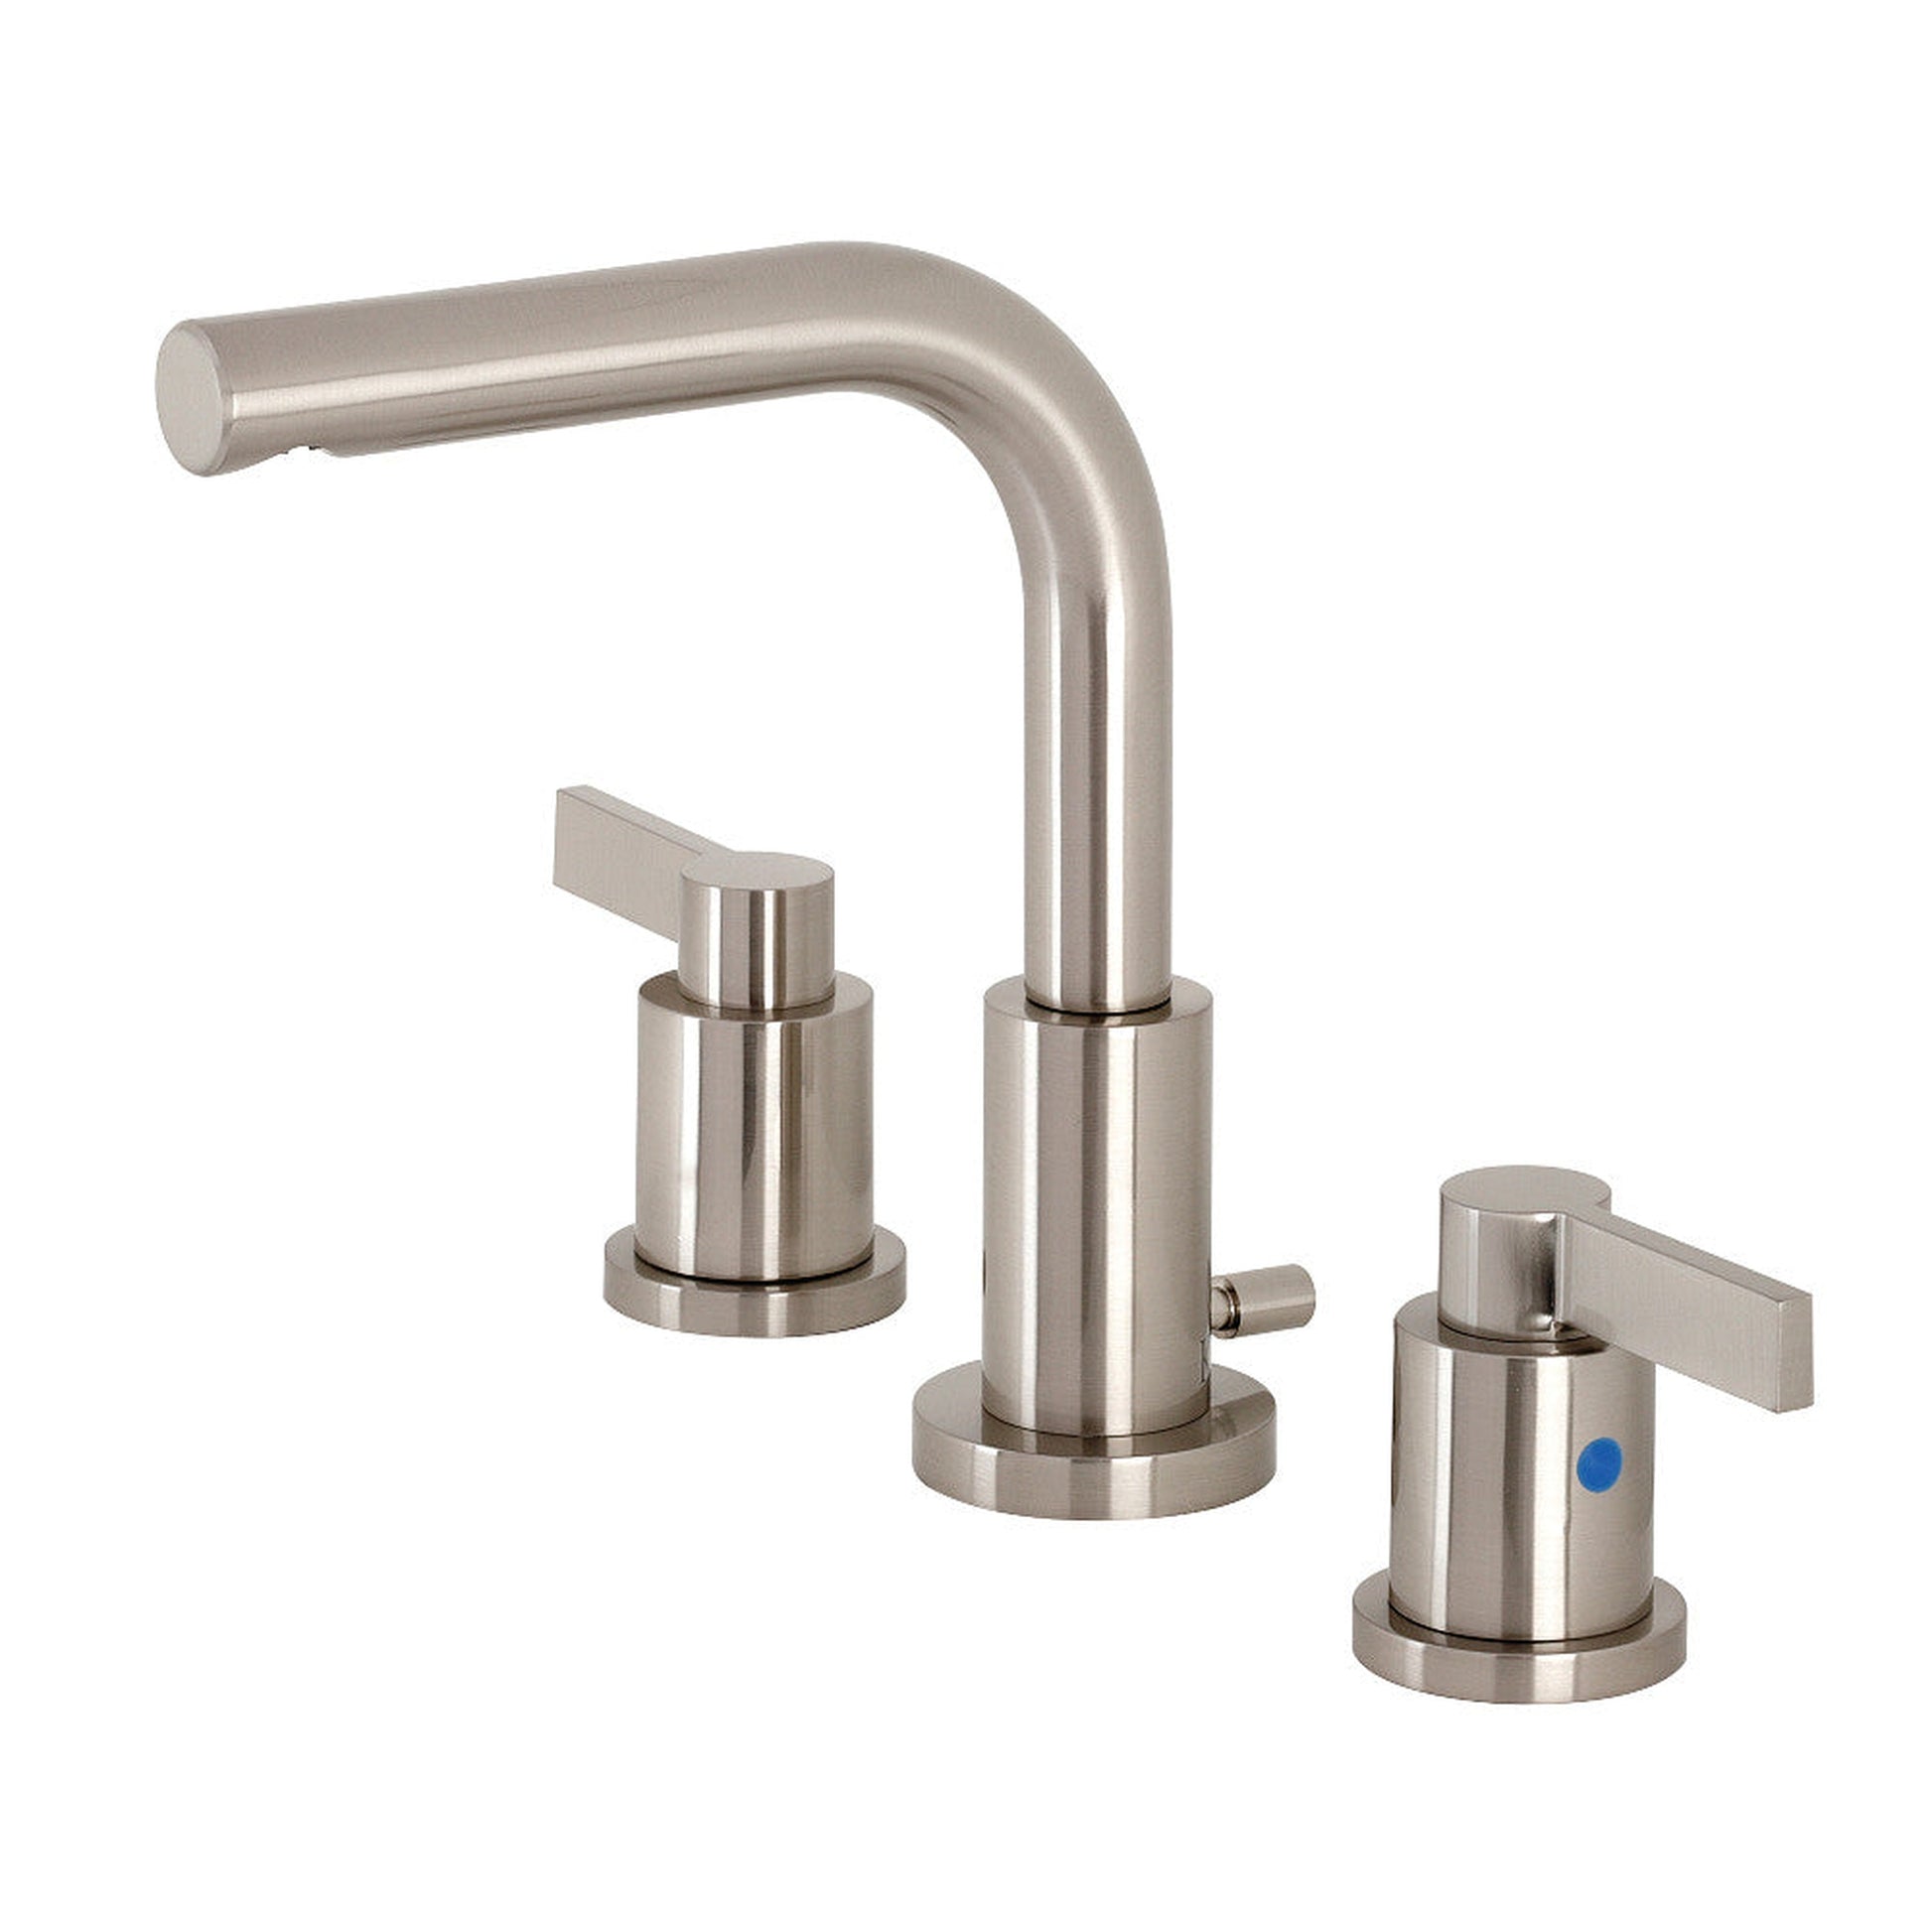 Fauceture FSC8958NDL 8 in. Widespread Bathroom Faucet, Brushed Nickel